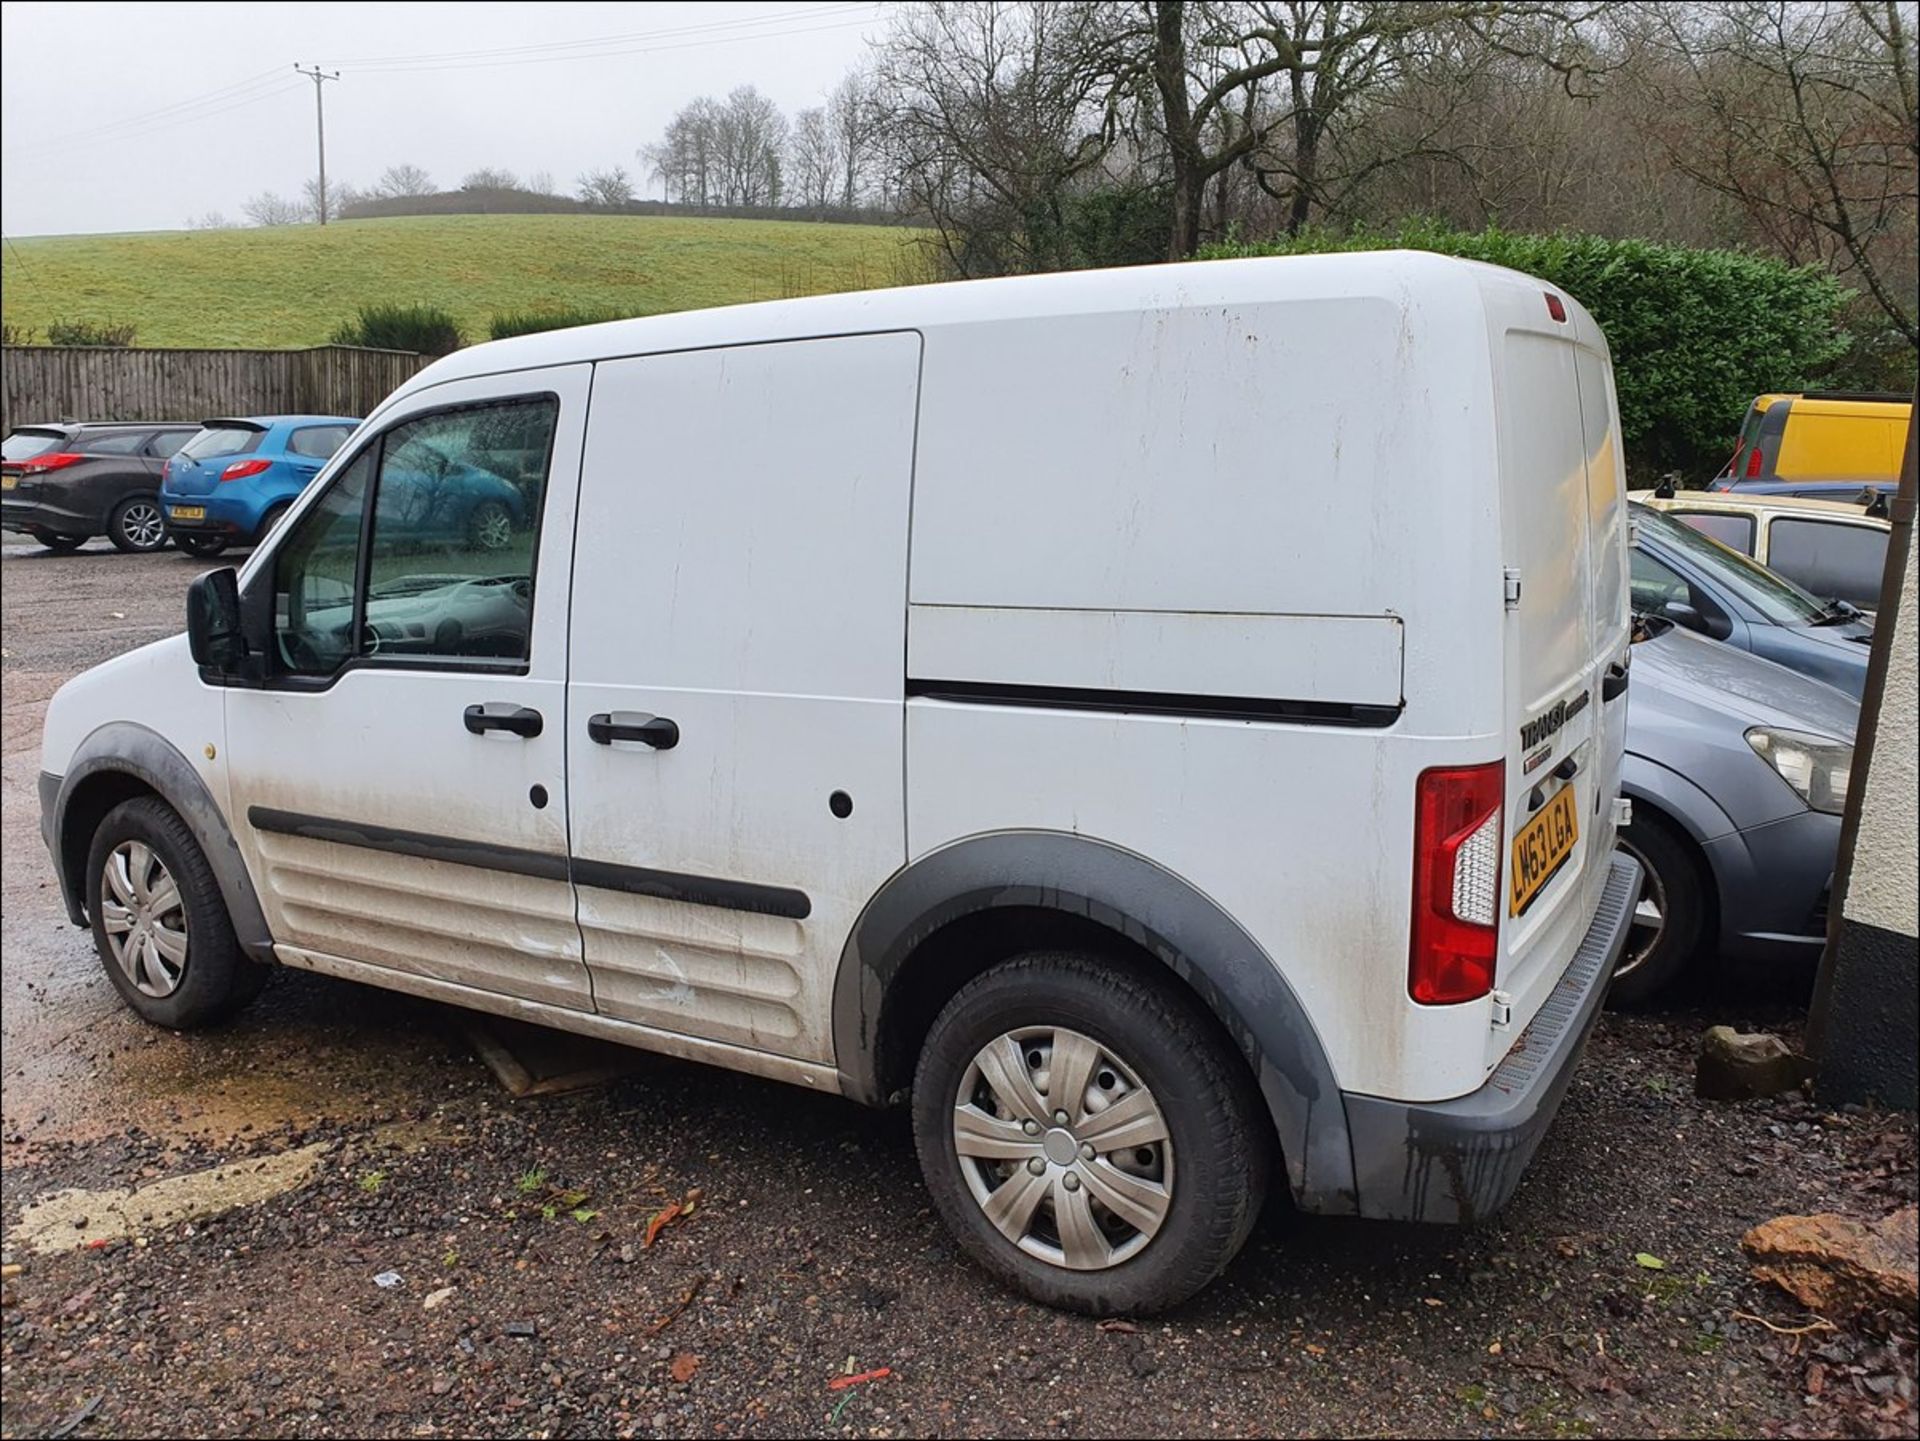 13/63 FORD TRANSIT CONNECT T200 - 1753cc Van (White, 177k) - Image 4 of 10